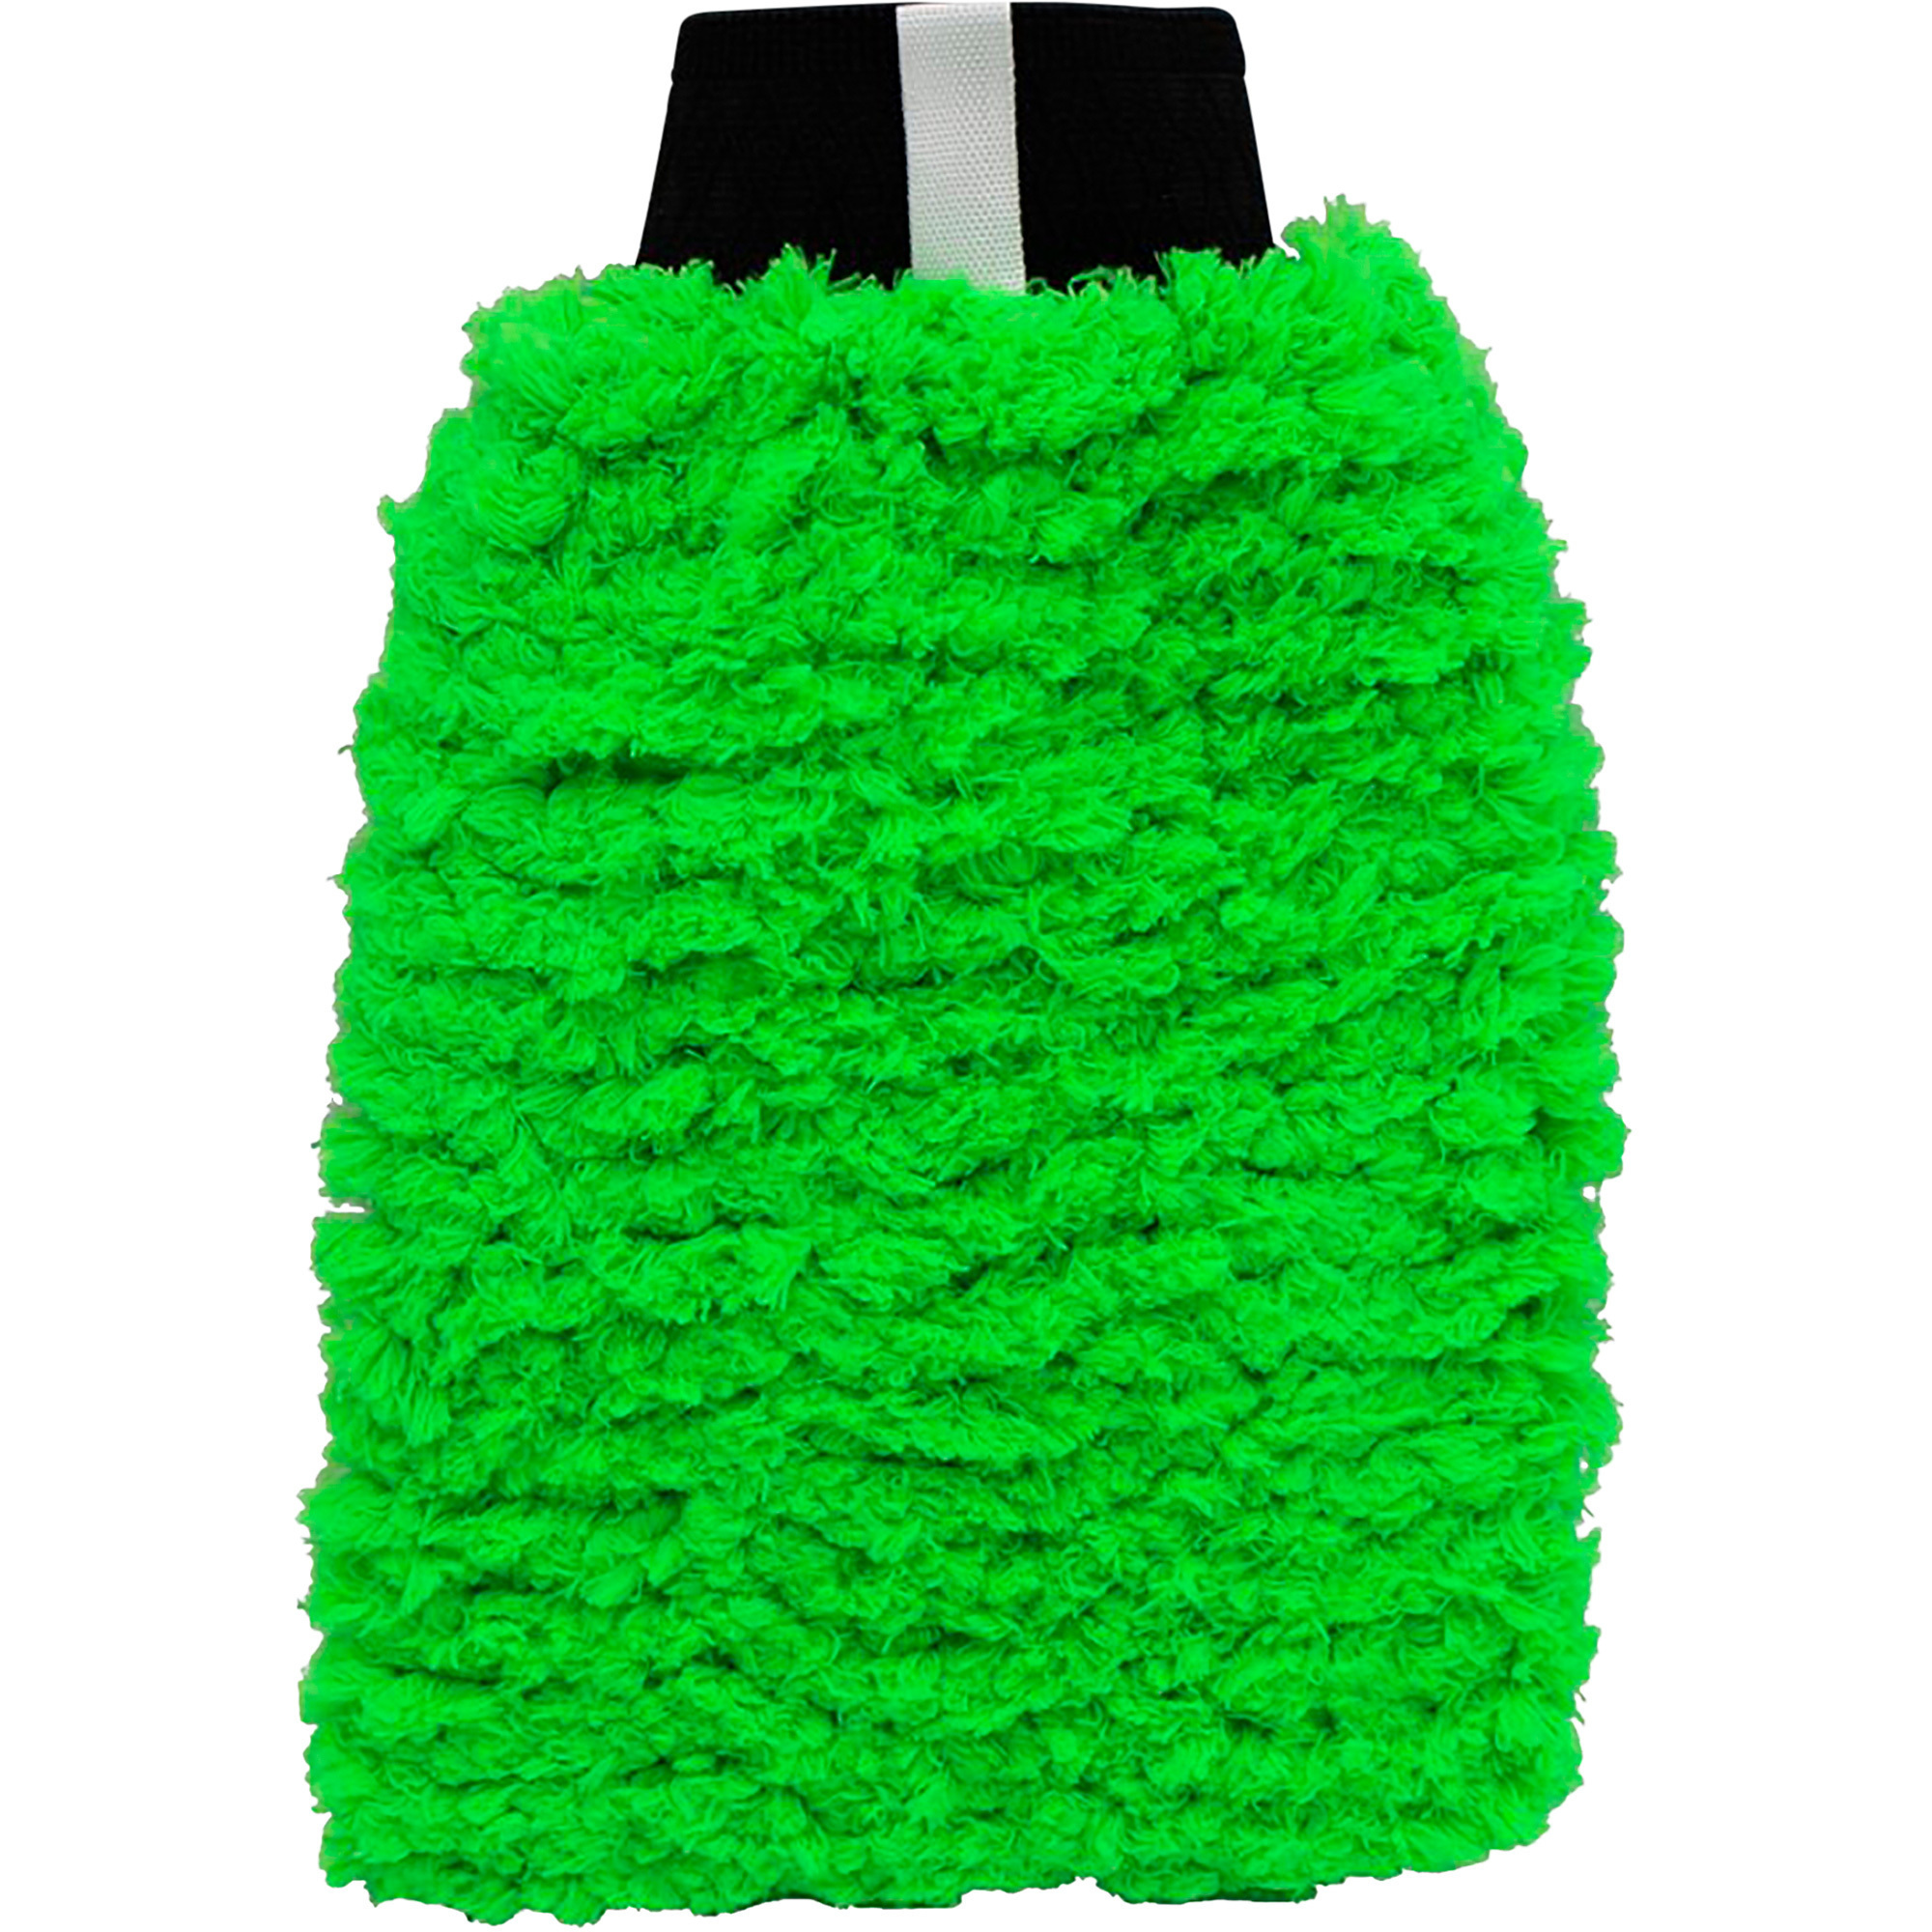 Grip 2-in-1 Microfiber/Chenille Wash Mitt - for Wet or Dry Use, Size: One Size